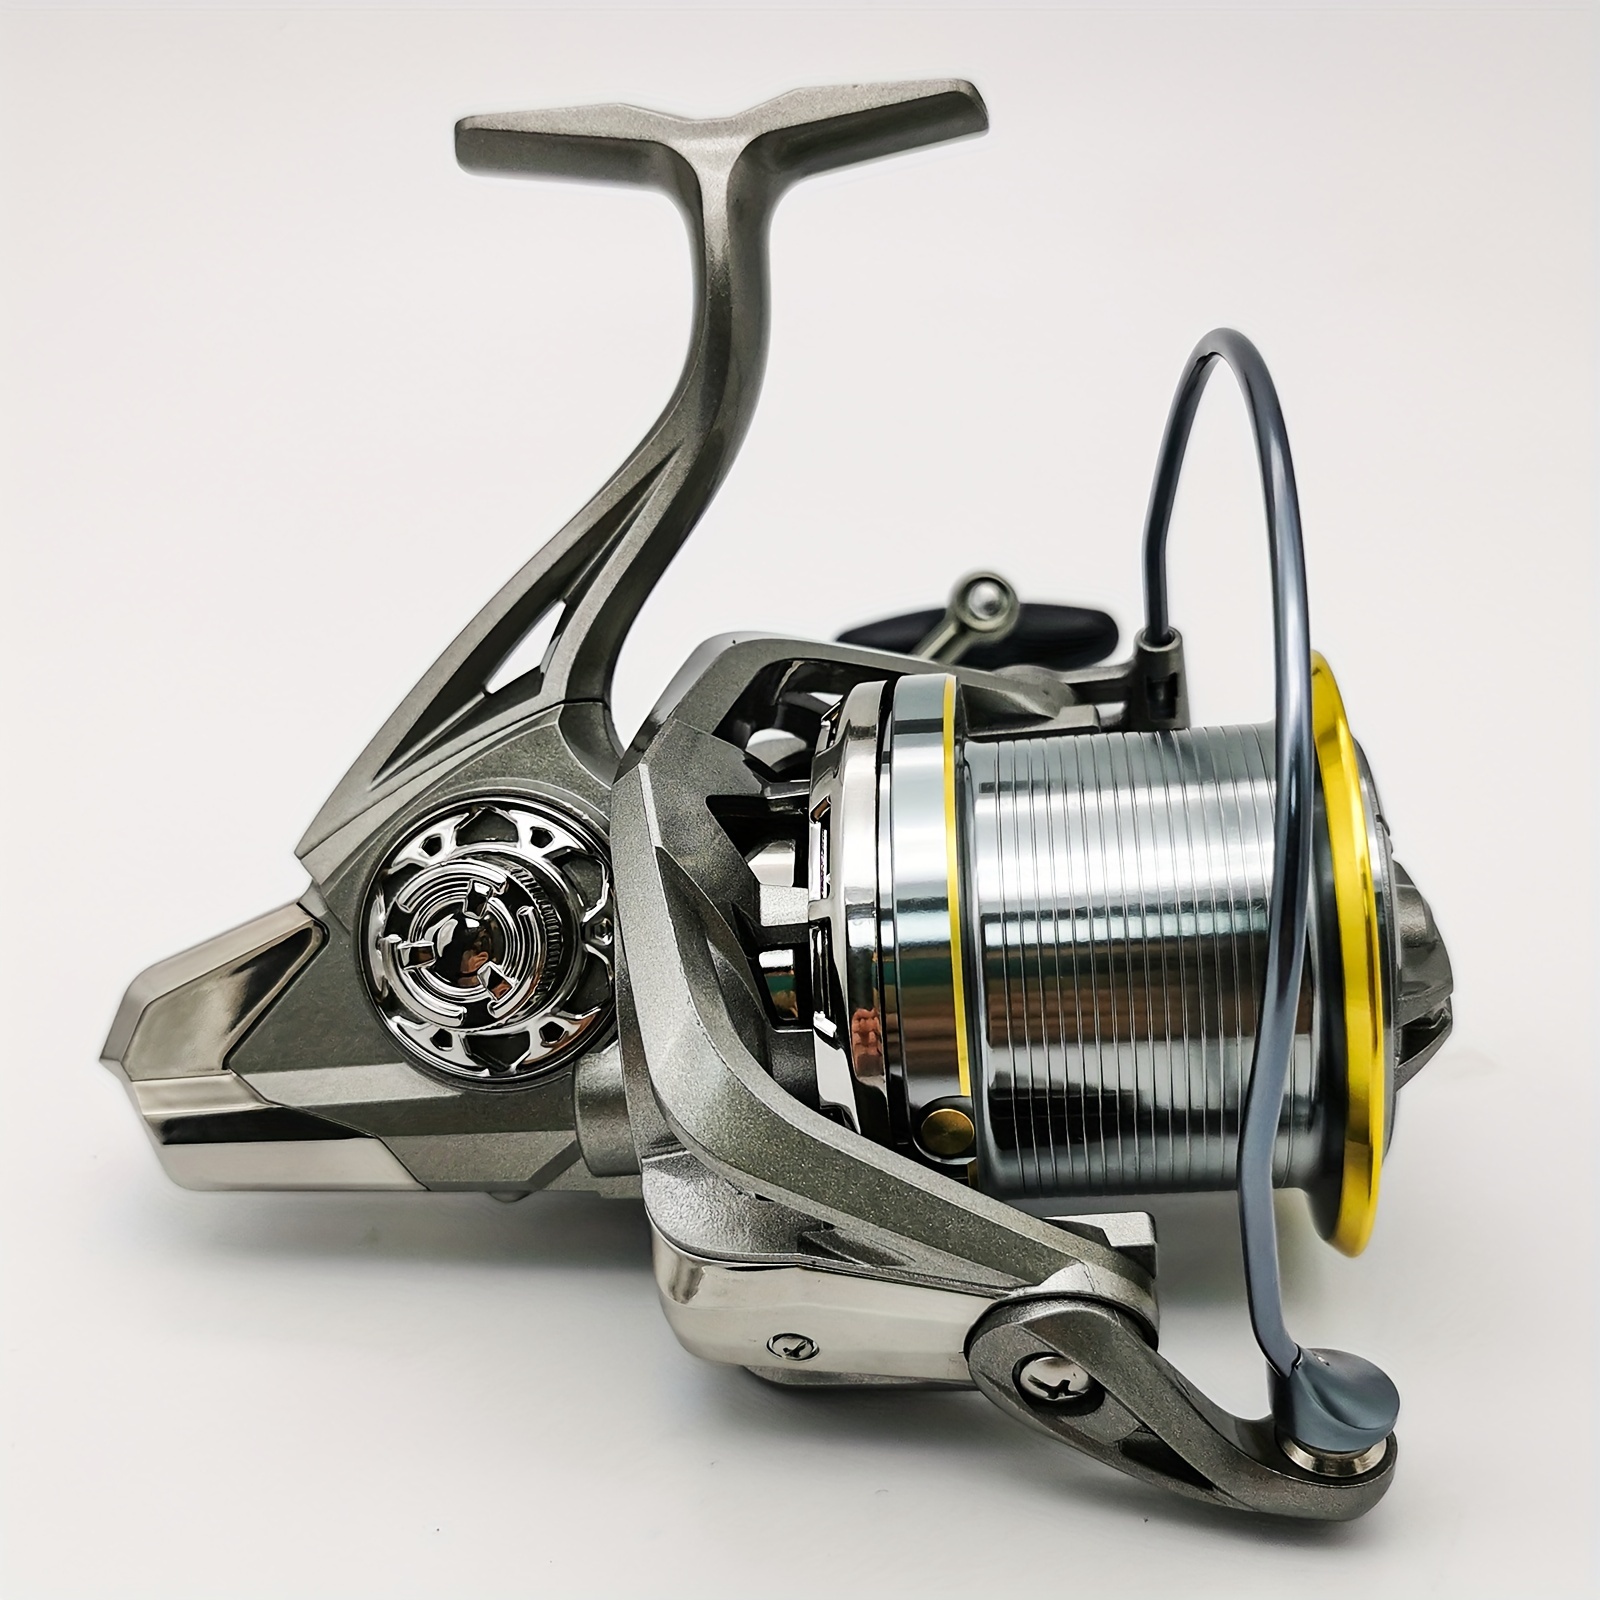 17+1bb Spinning Reel 4.8:1 With Interchangeable Left And Right